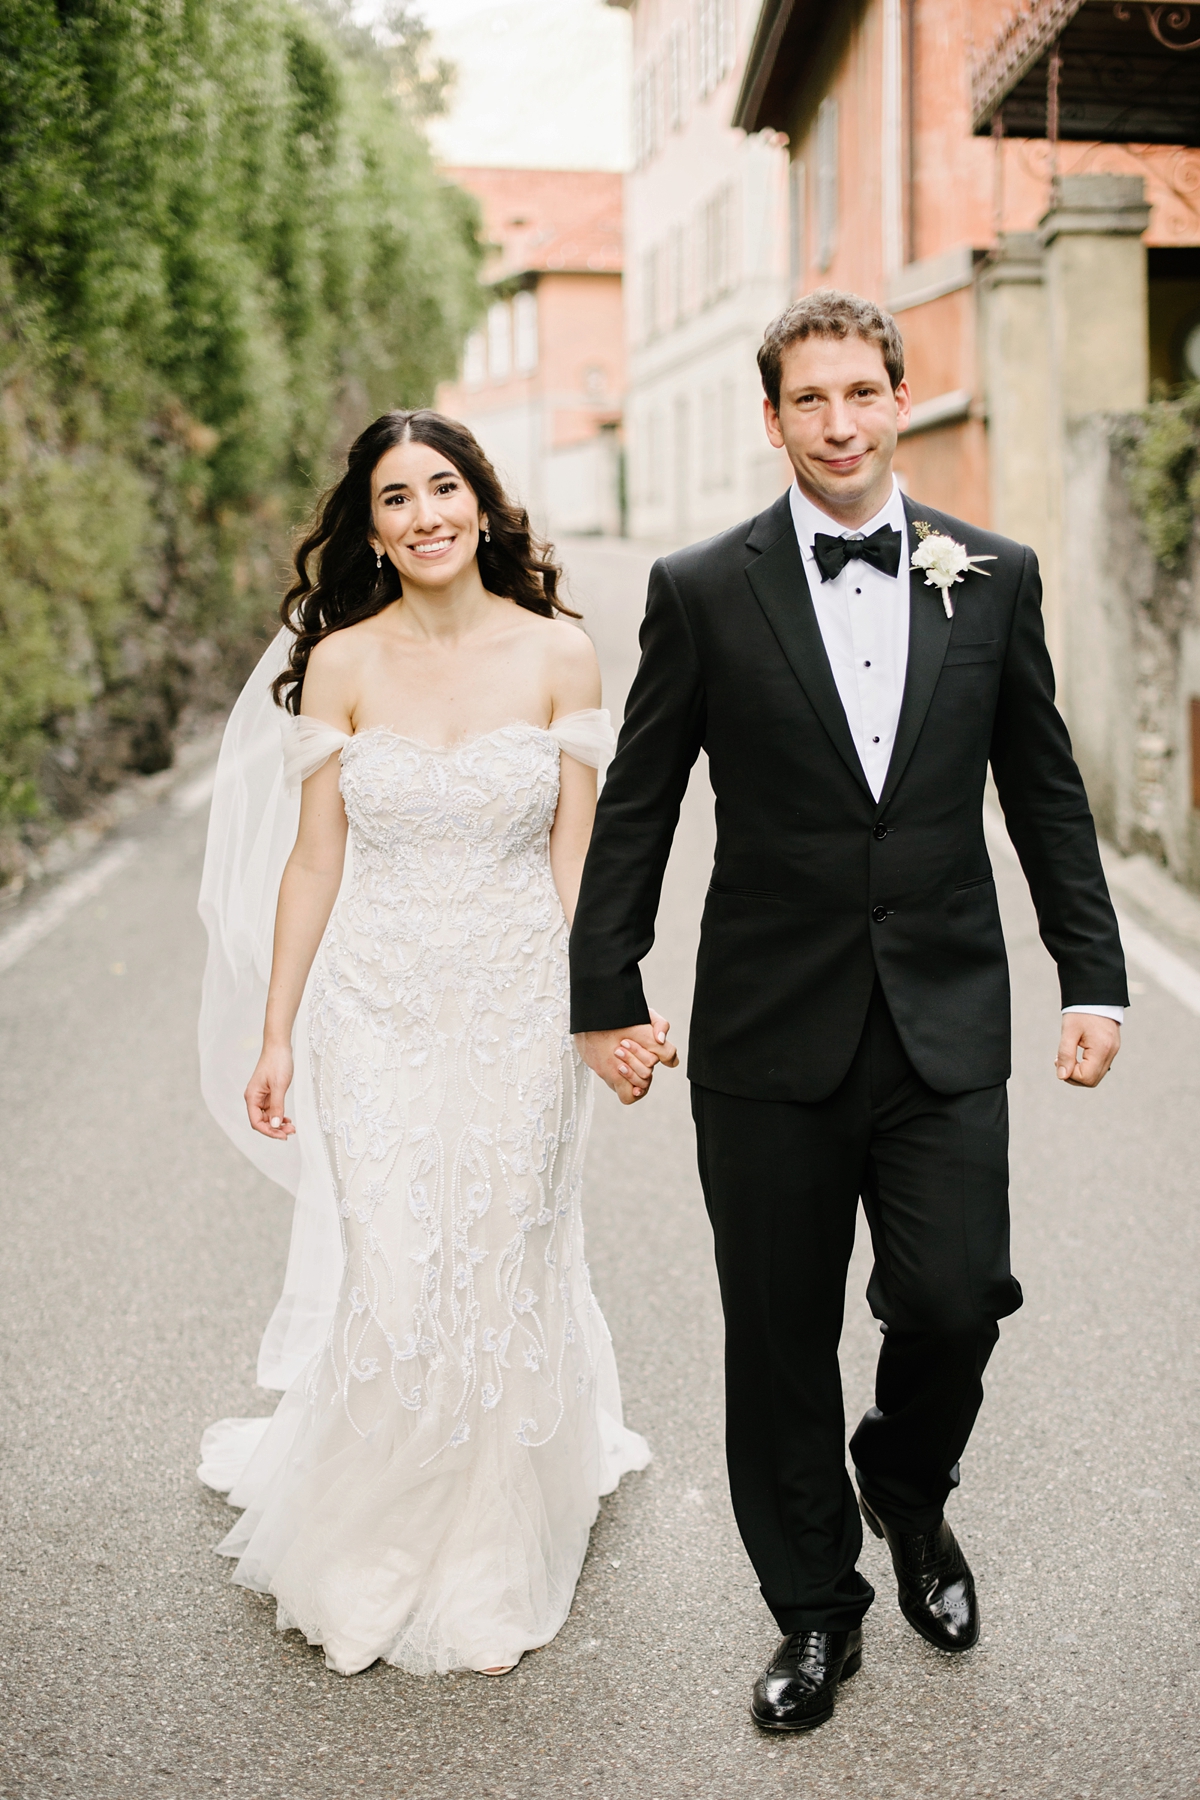 42 A Monique Lhuillier gown for a romantic summer villa wedding on Lake Como in Italy